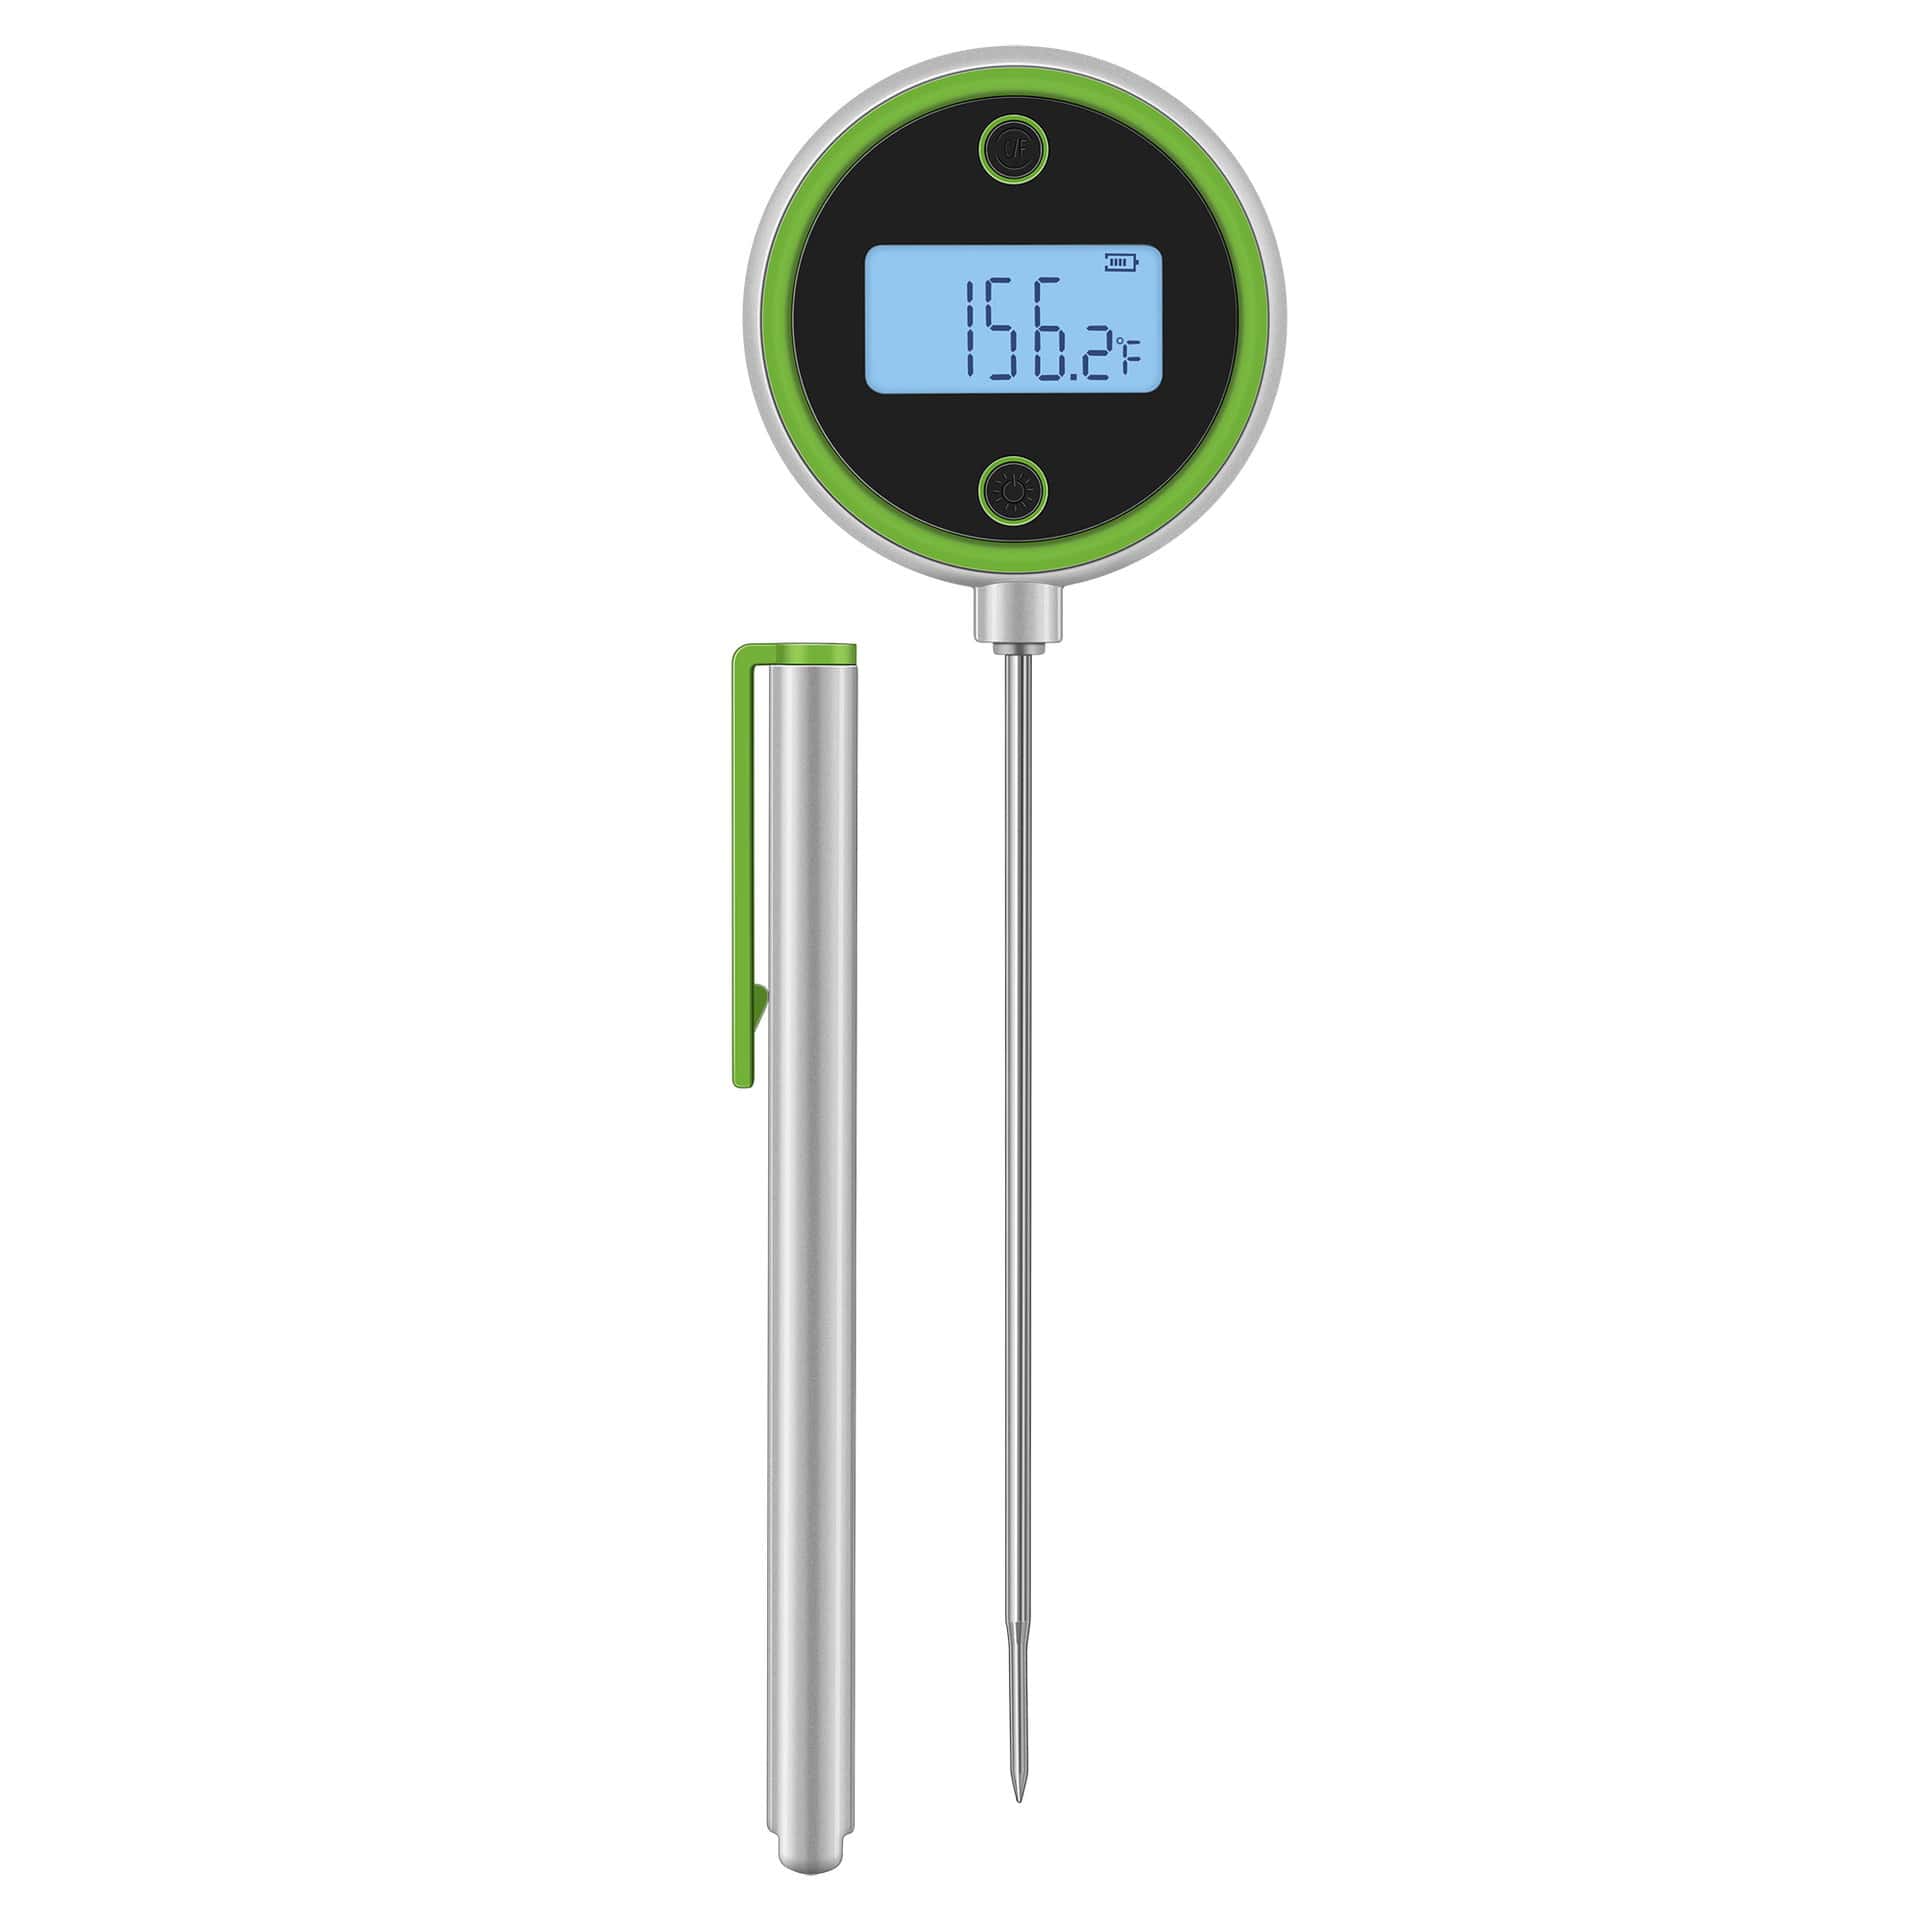 Digital Thermomether Cooking  Digital Kitchen Thermometer